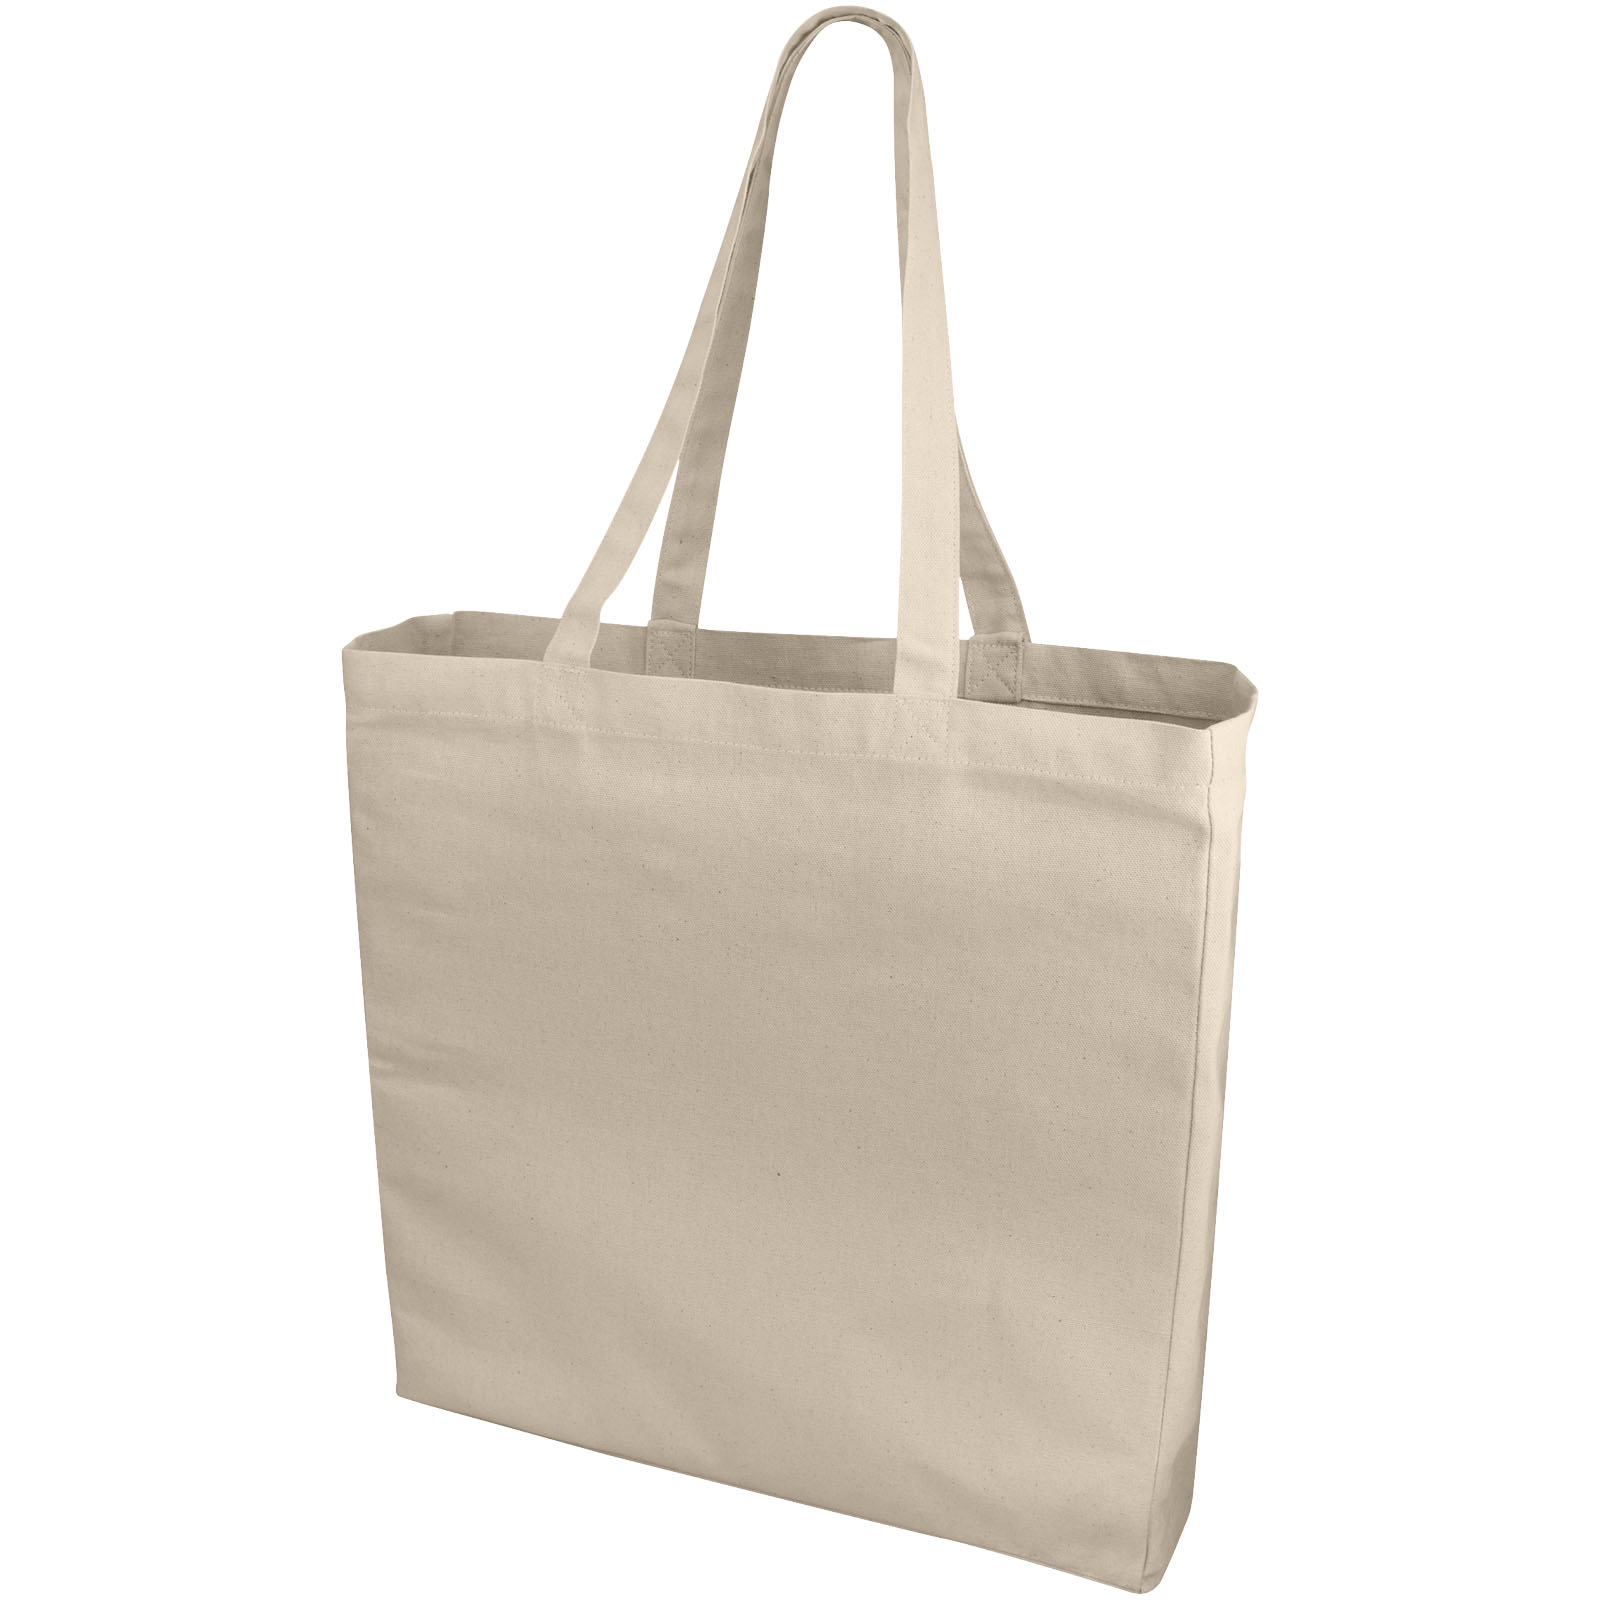 Advertising Shopping & Tote Bags - Odessa 220 g/m² cotton tote bag 13L - 0